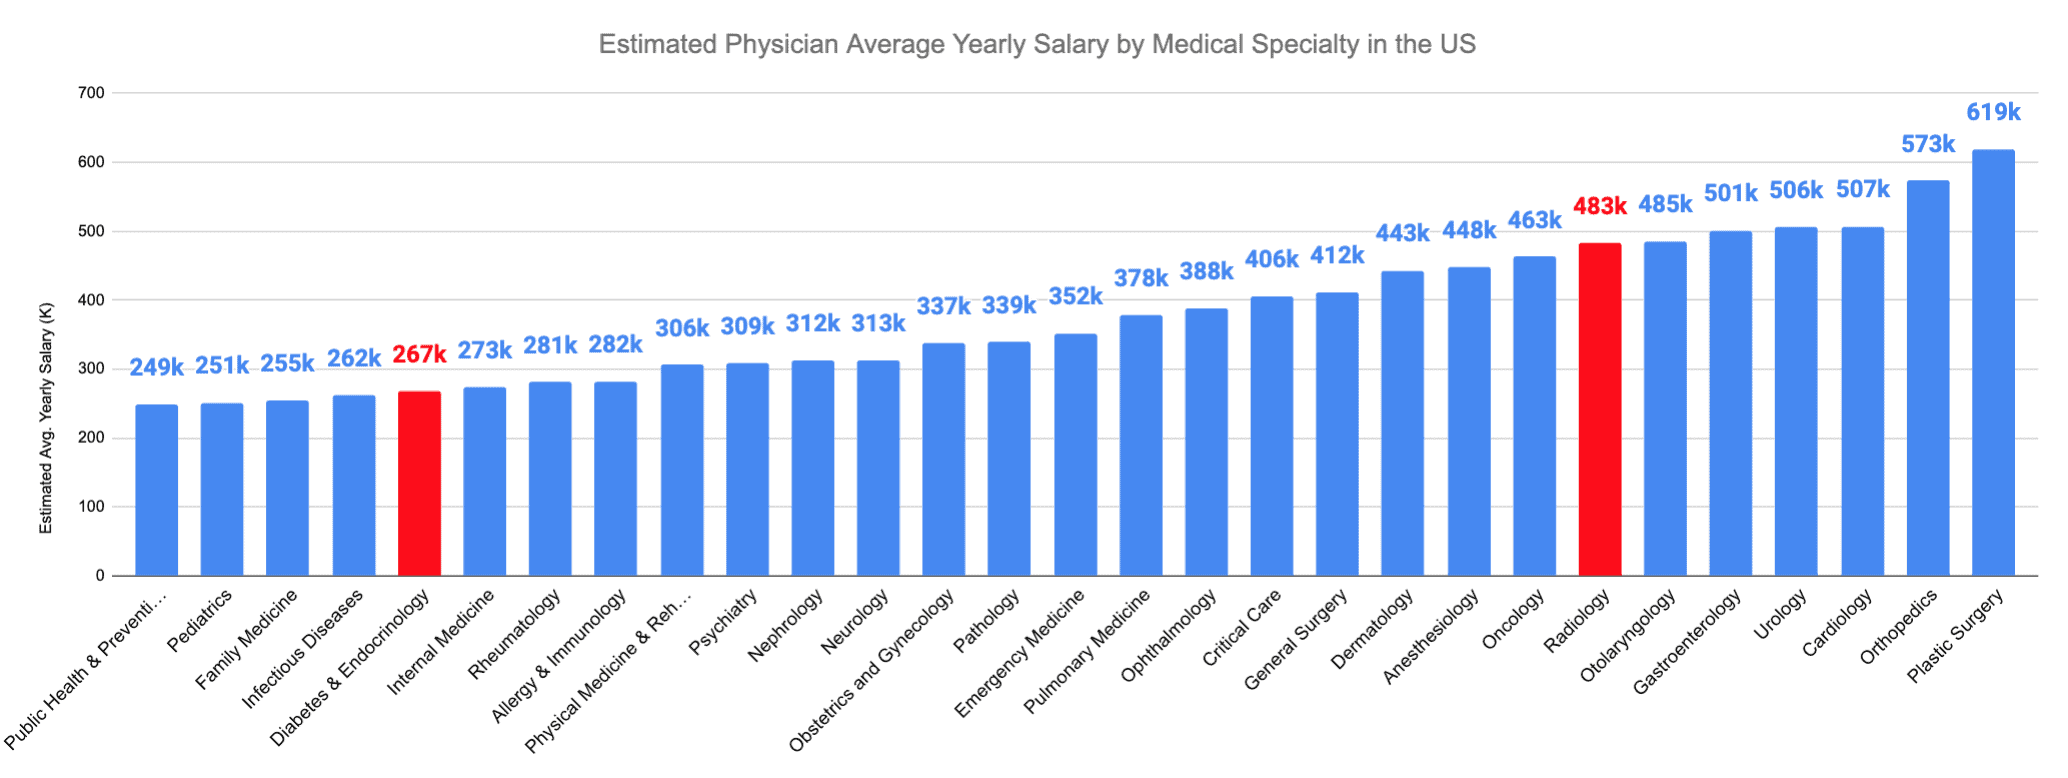 Radiology vs. Diabetes and Endocrinology Estimated Physician Average Yearly Salary by Medical Specialty in the US